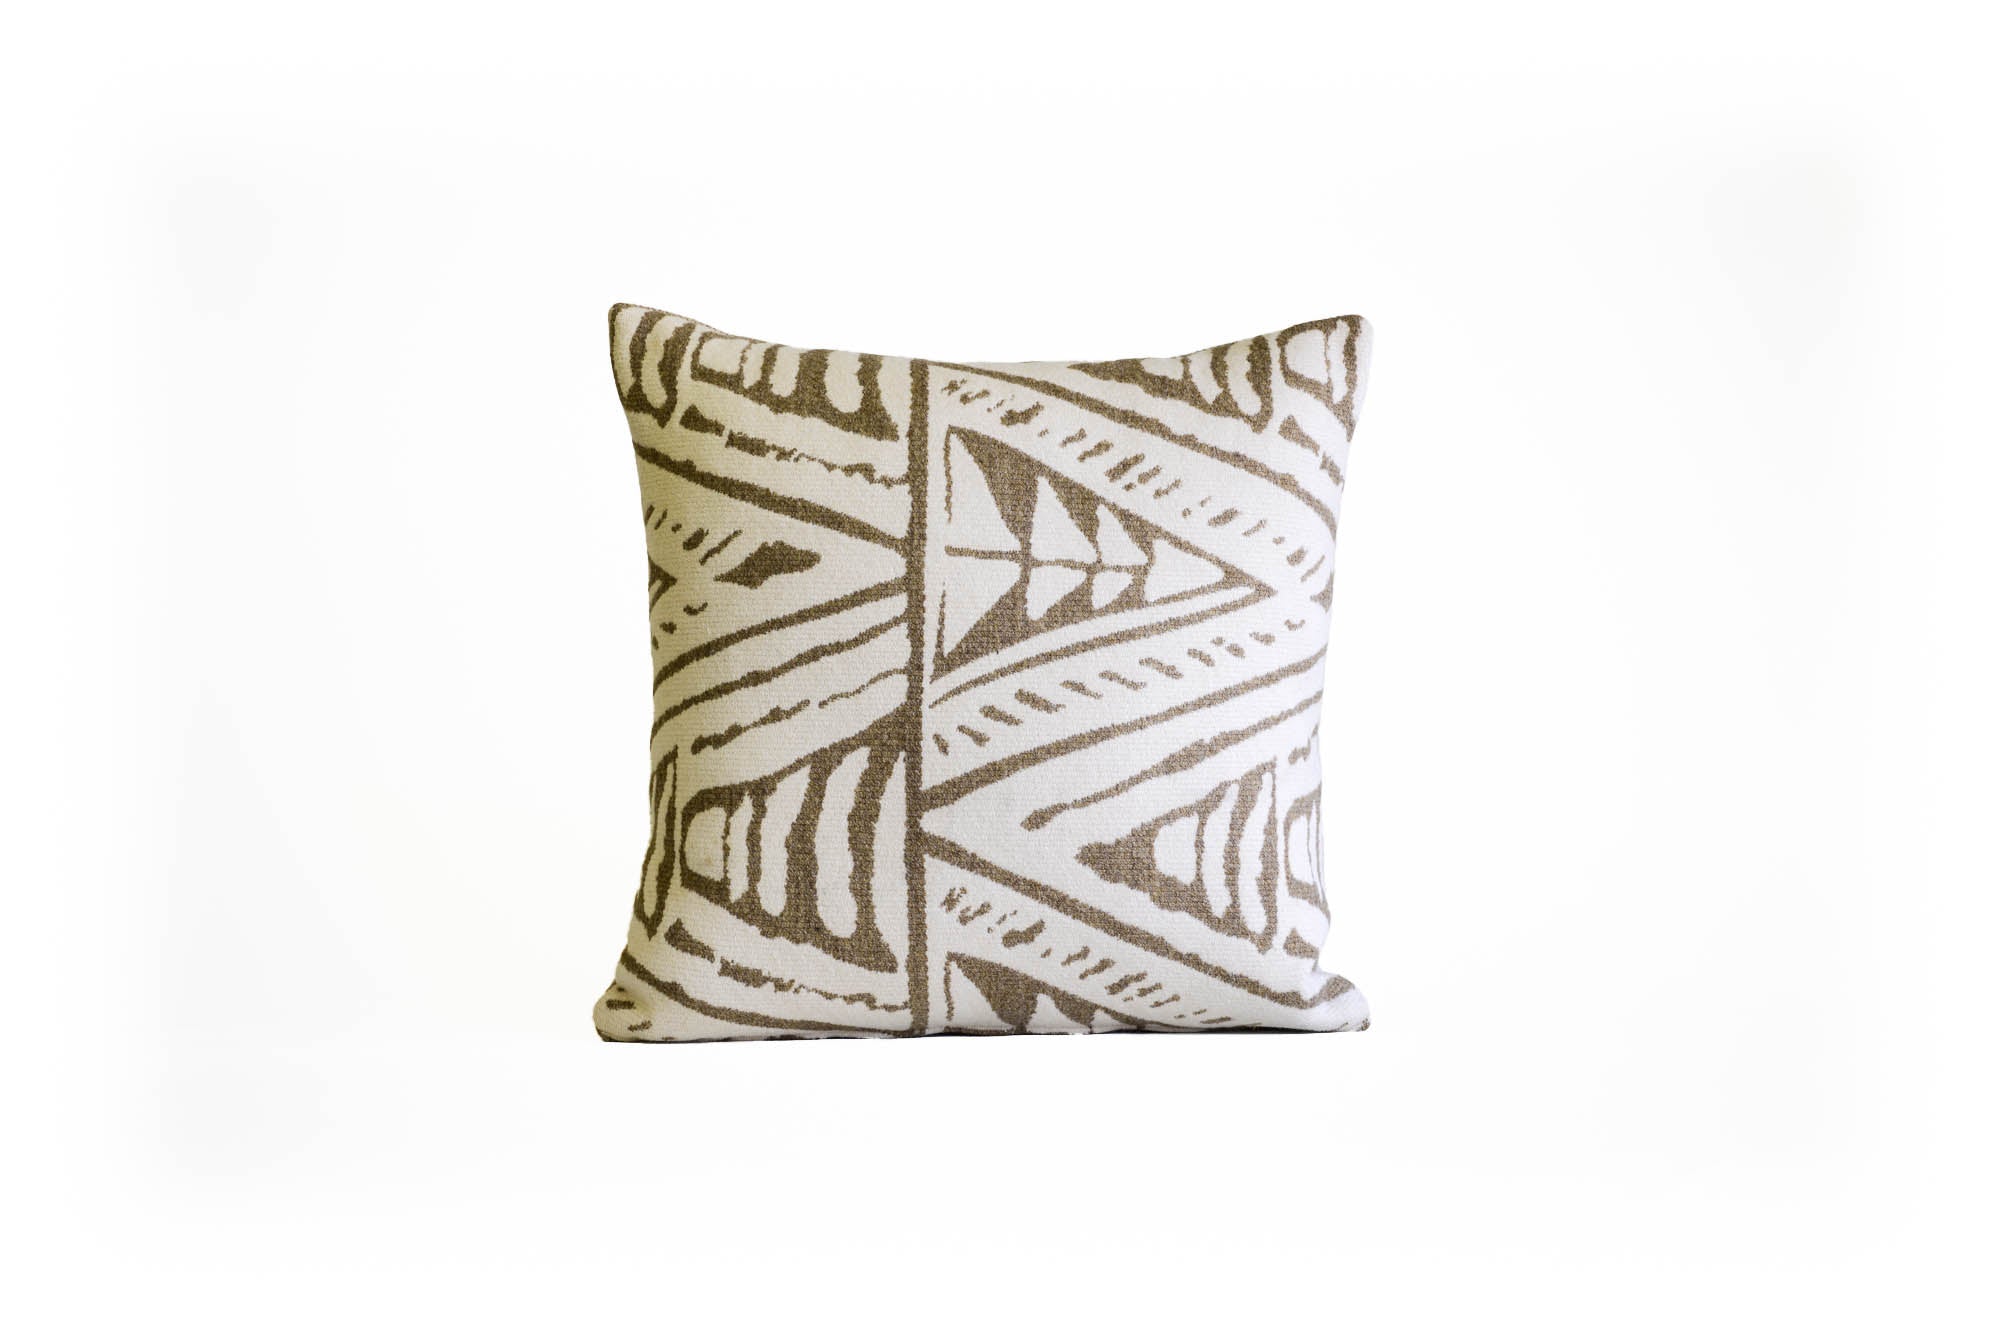 Wool Patterned Textural Pillow Camel and White